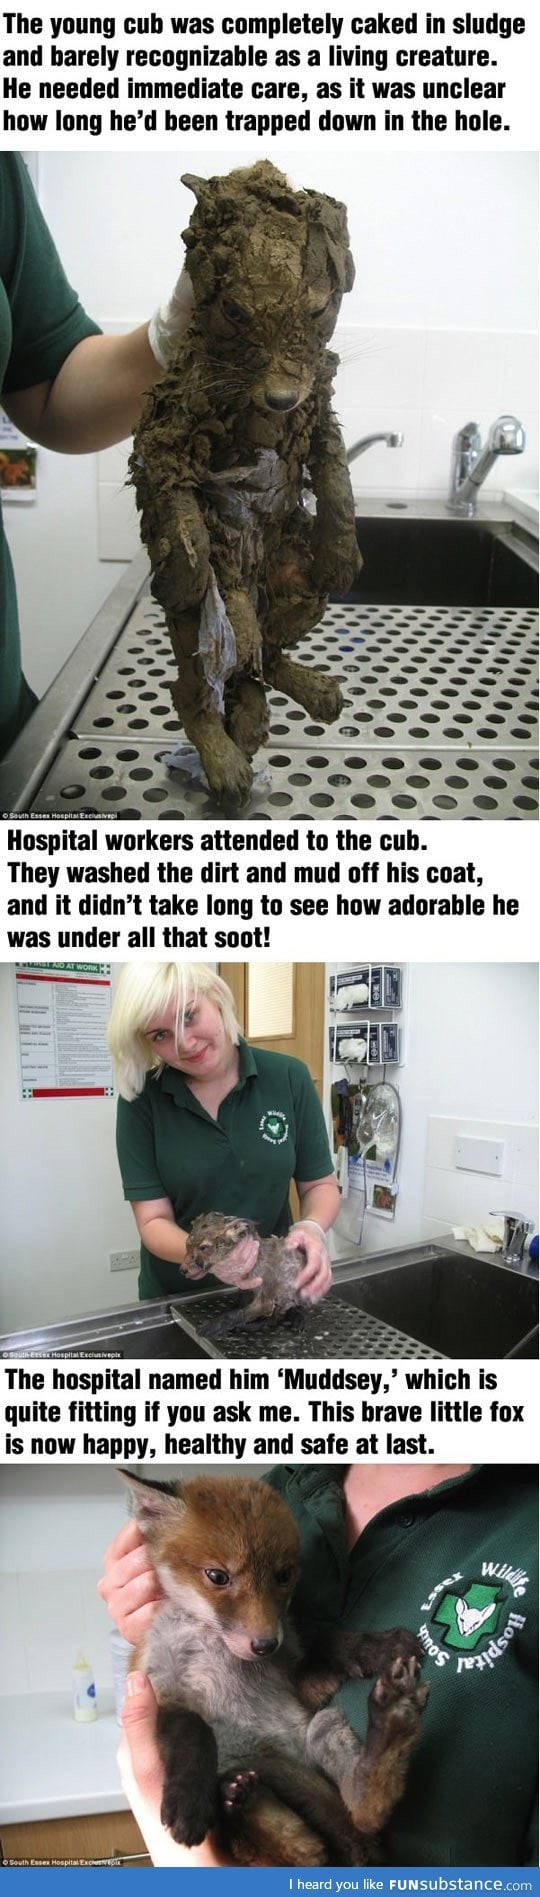 They found this cute little cub caked in the mud